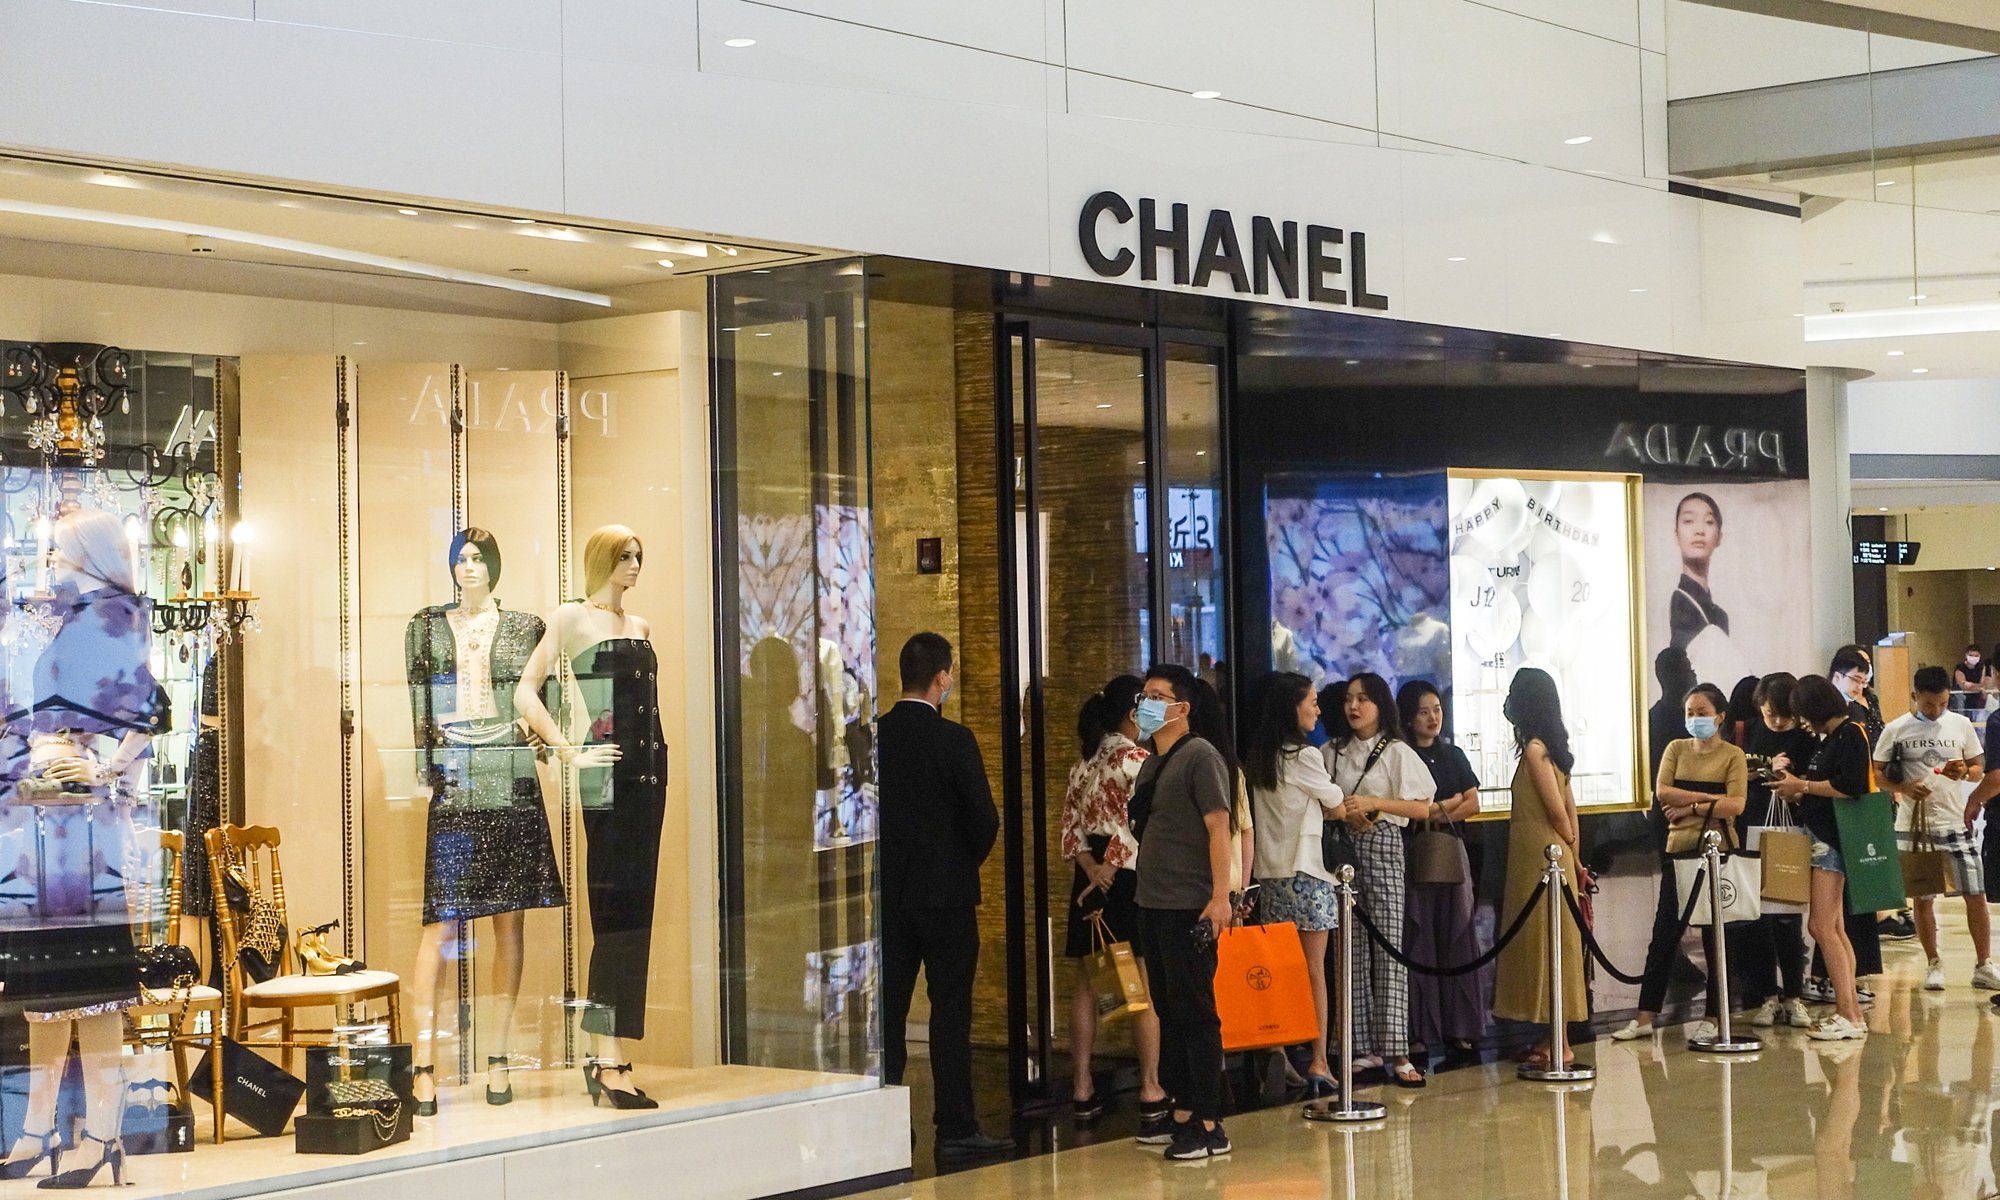 Grader celsius Lighed ægteskab China's luxury sales estimated to grow 48% in 2020, fueled by online sales  and a consumption 'comeback' - Global Times